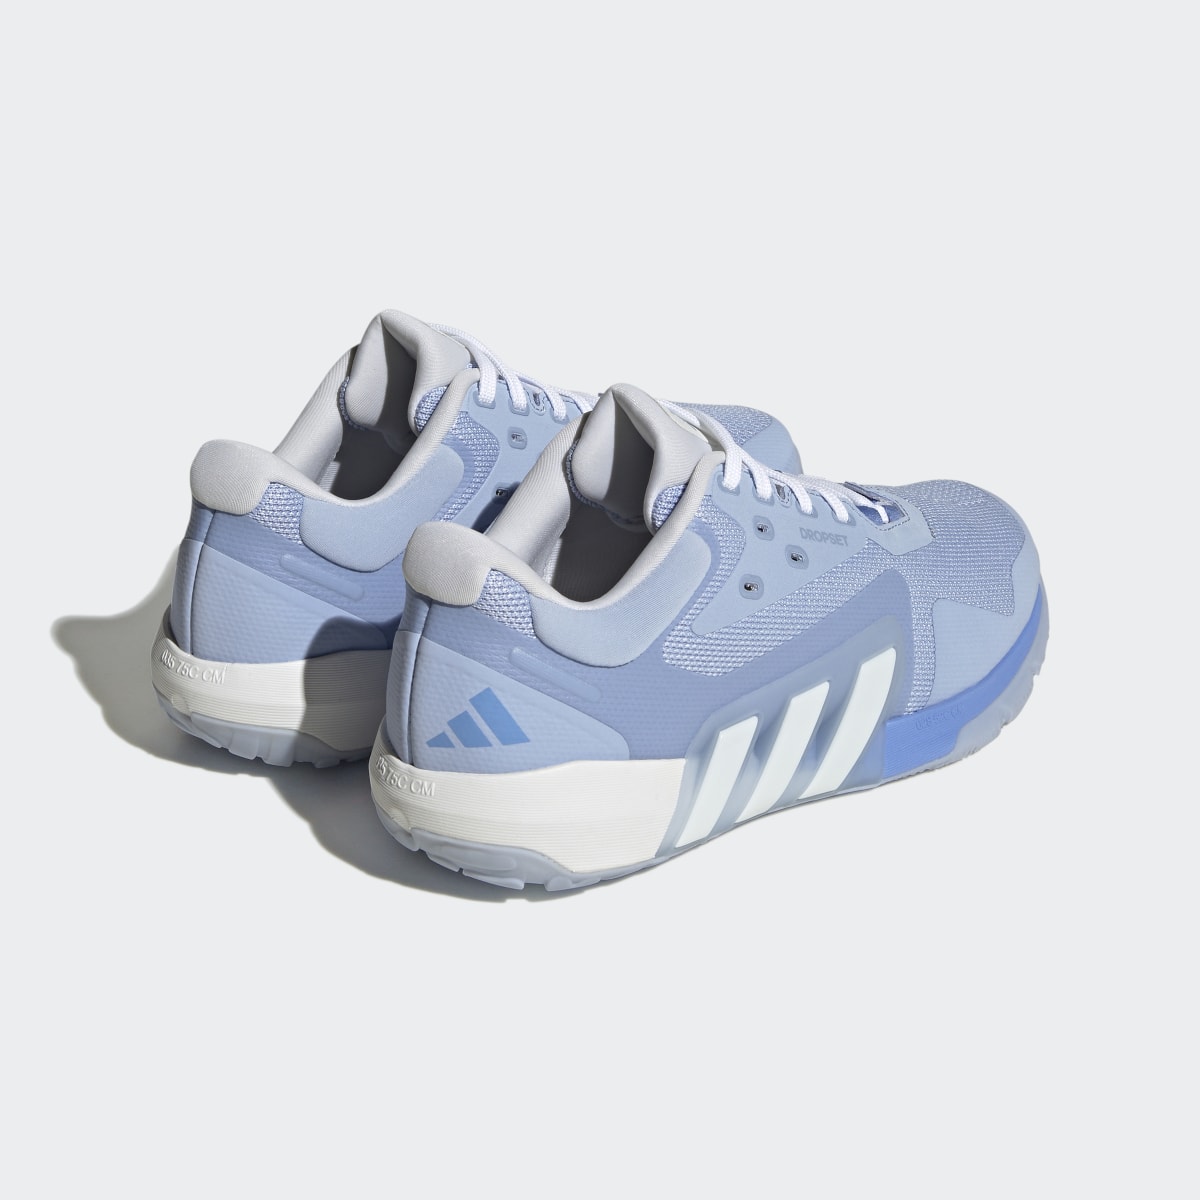 Adidas Dropset Trainer Shoes. 9